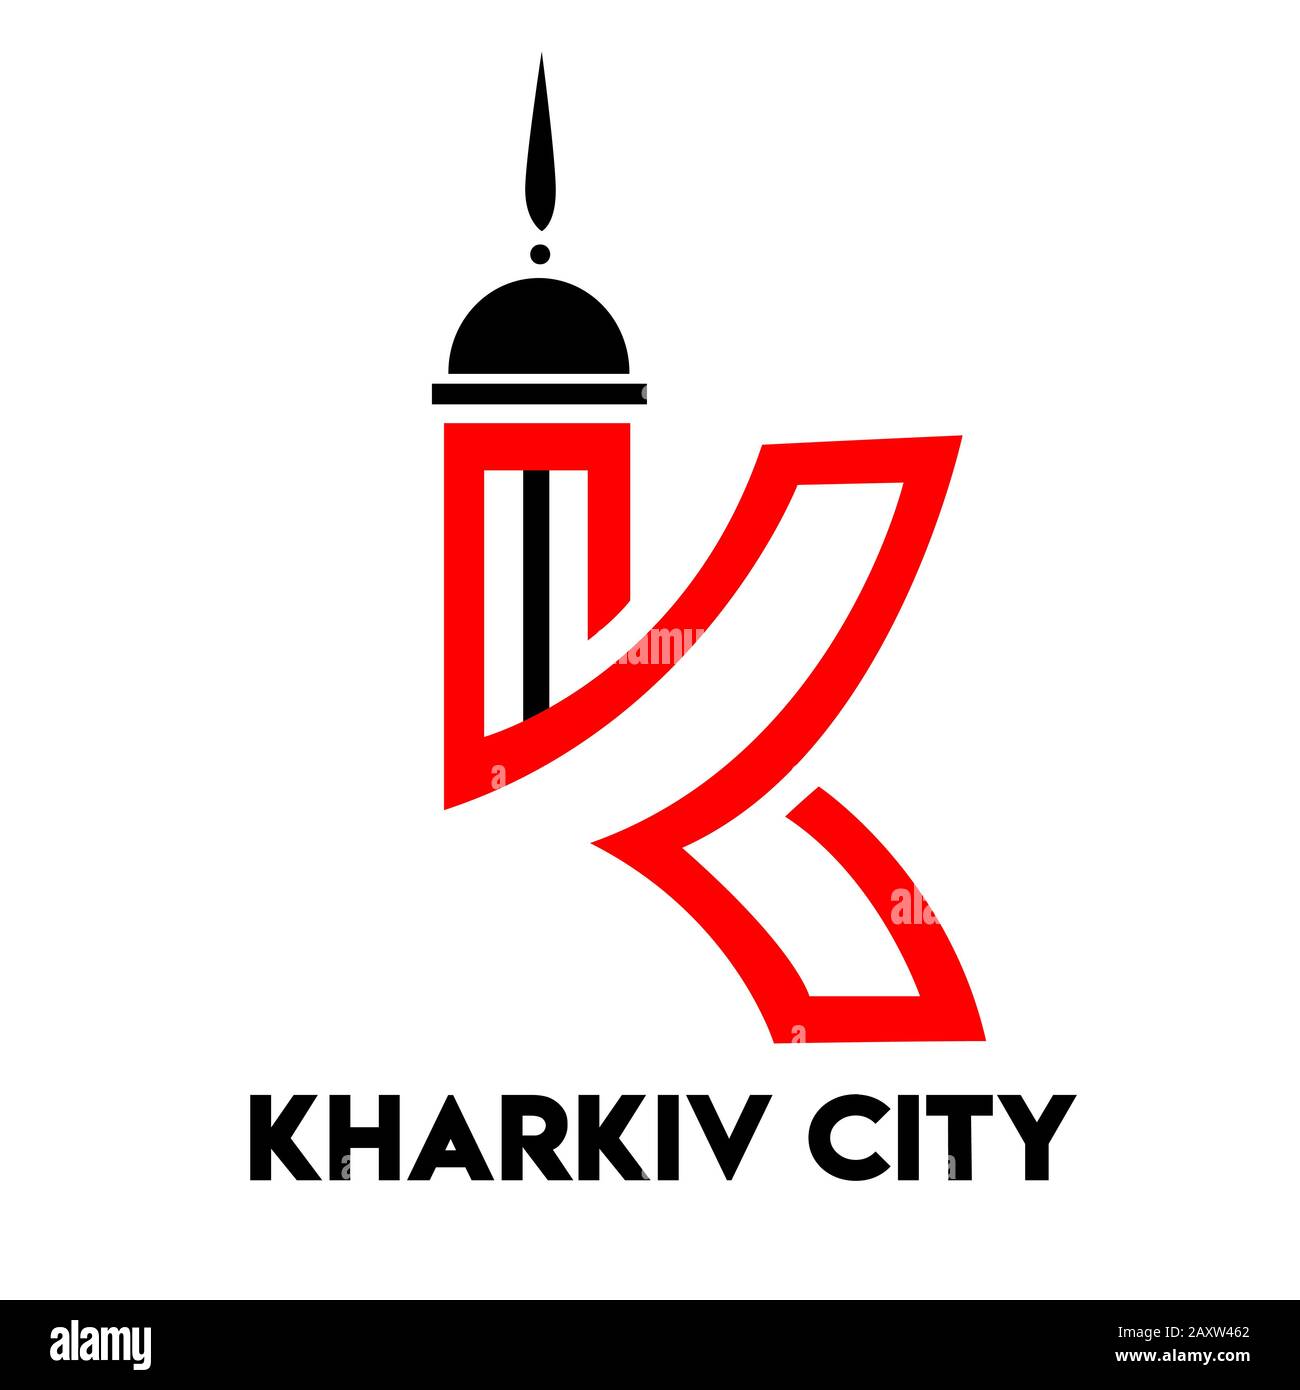 kharkov city text design with red heart typographic icon Stock Vector